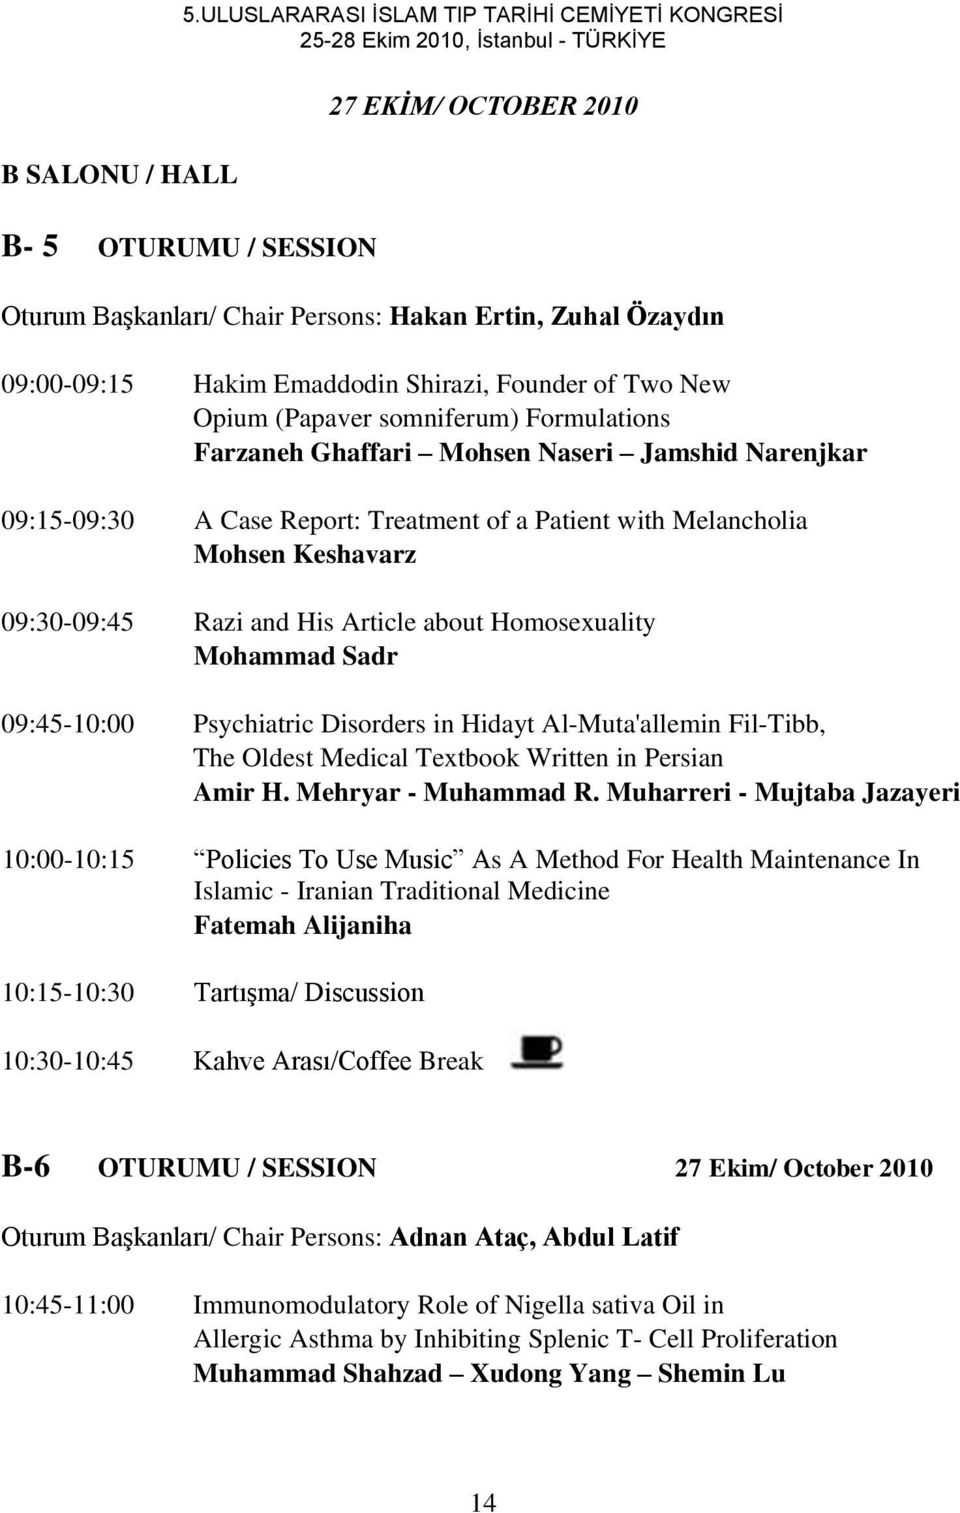 Patient with Melancholia Mohsen Keshavarz 09:30-09:45 Razi and His Article about Homosexuality Mohammad Sadr 09:45-10:00 Psychiatric Disorders in Hidayt Al-Muta'allemin Fil-Tibb, The Oldest Medical